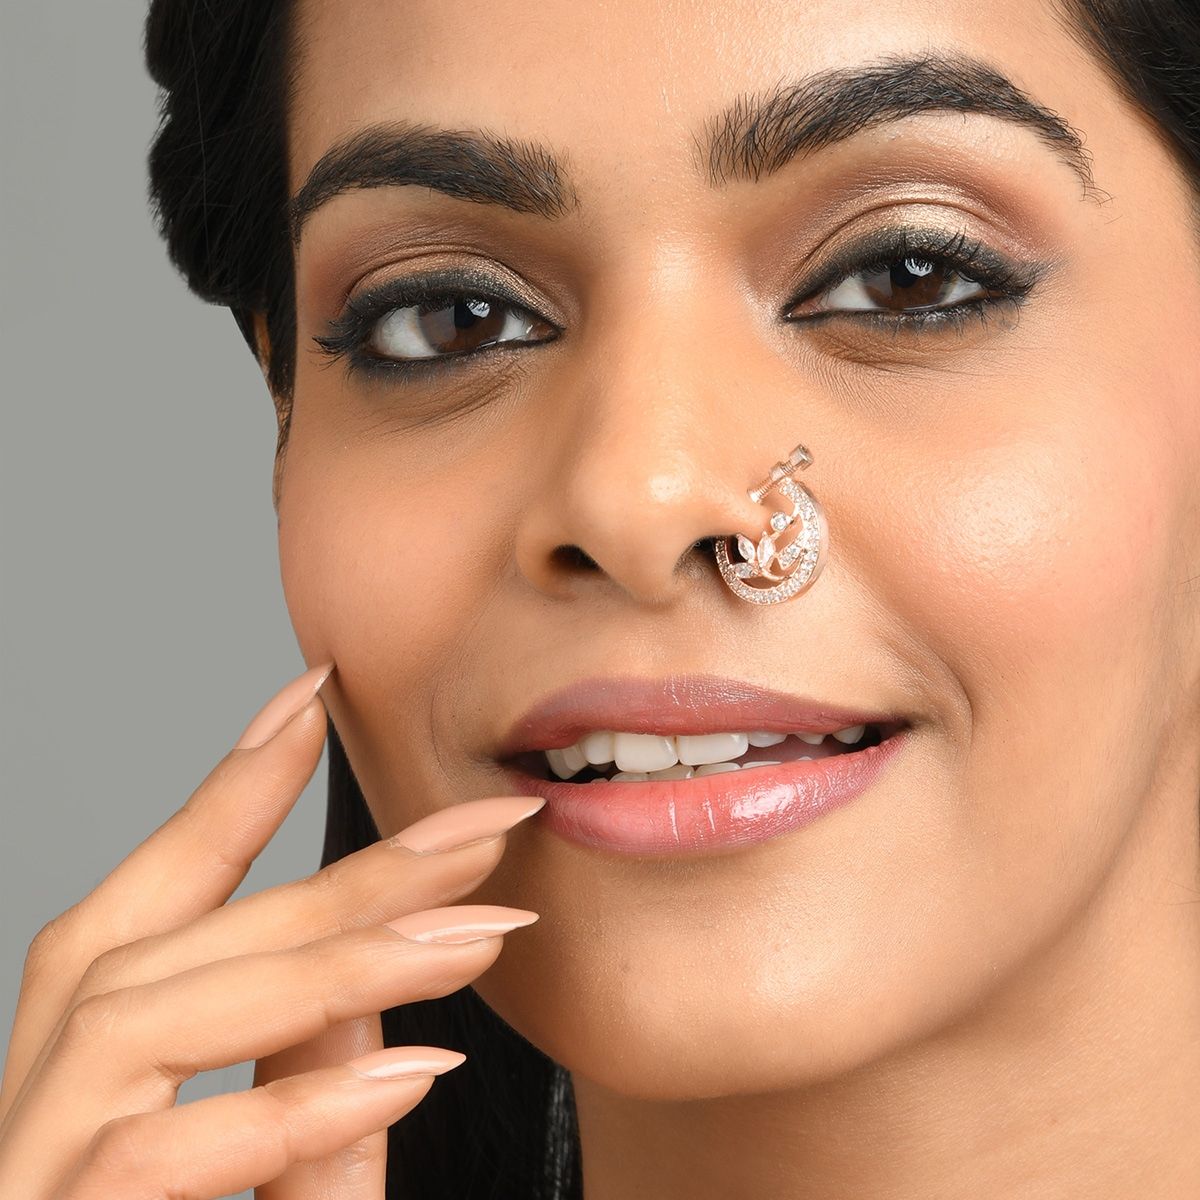 Cbazaar - Nose rings add a quintessential beauty to Indian... | Facebook